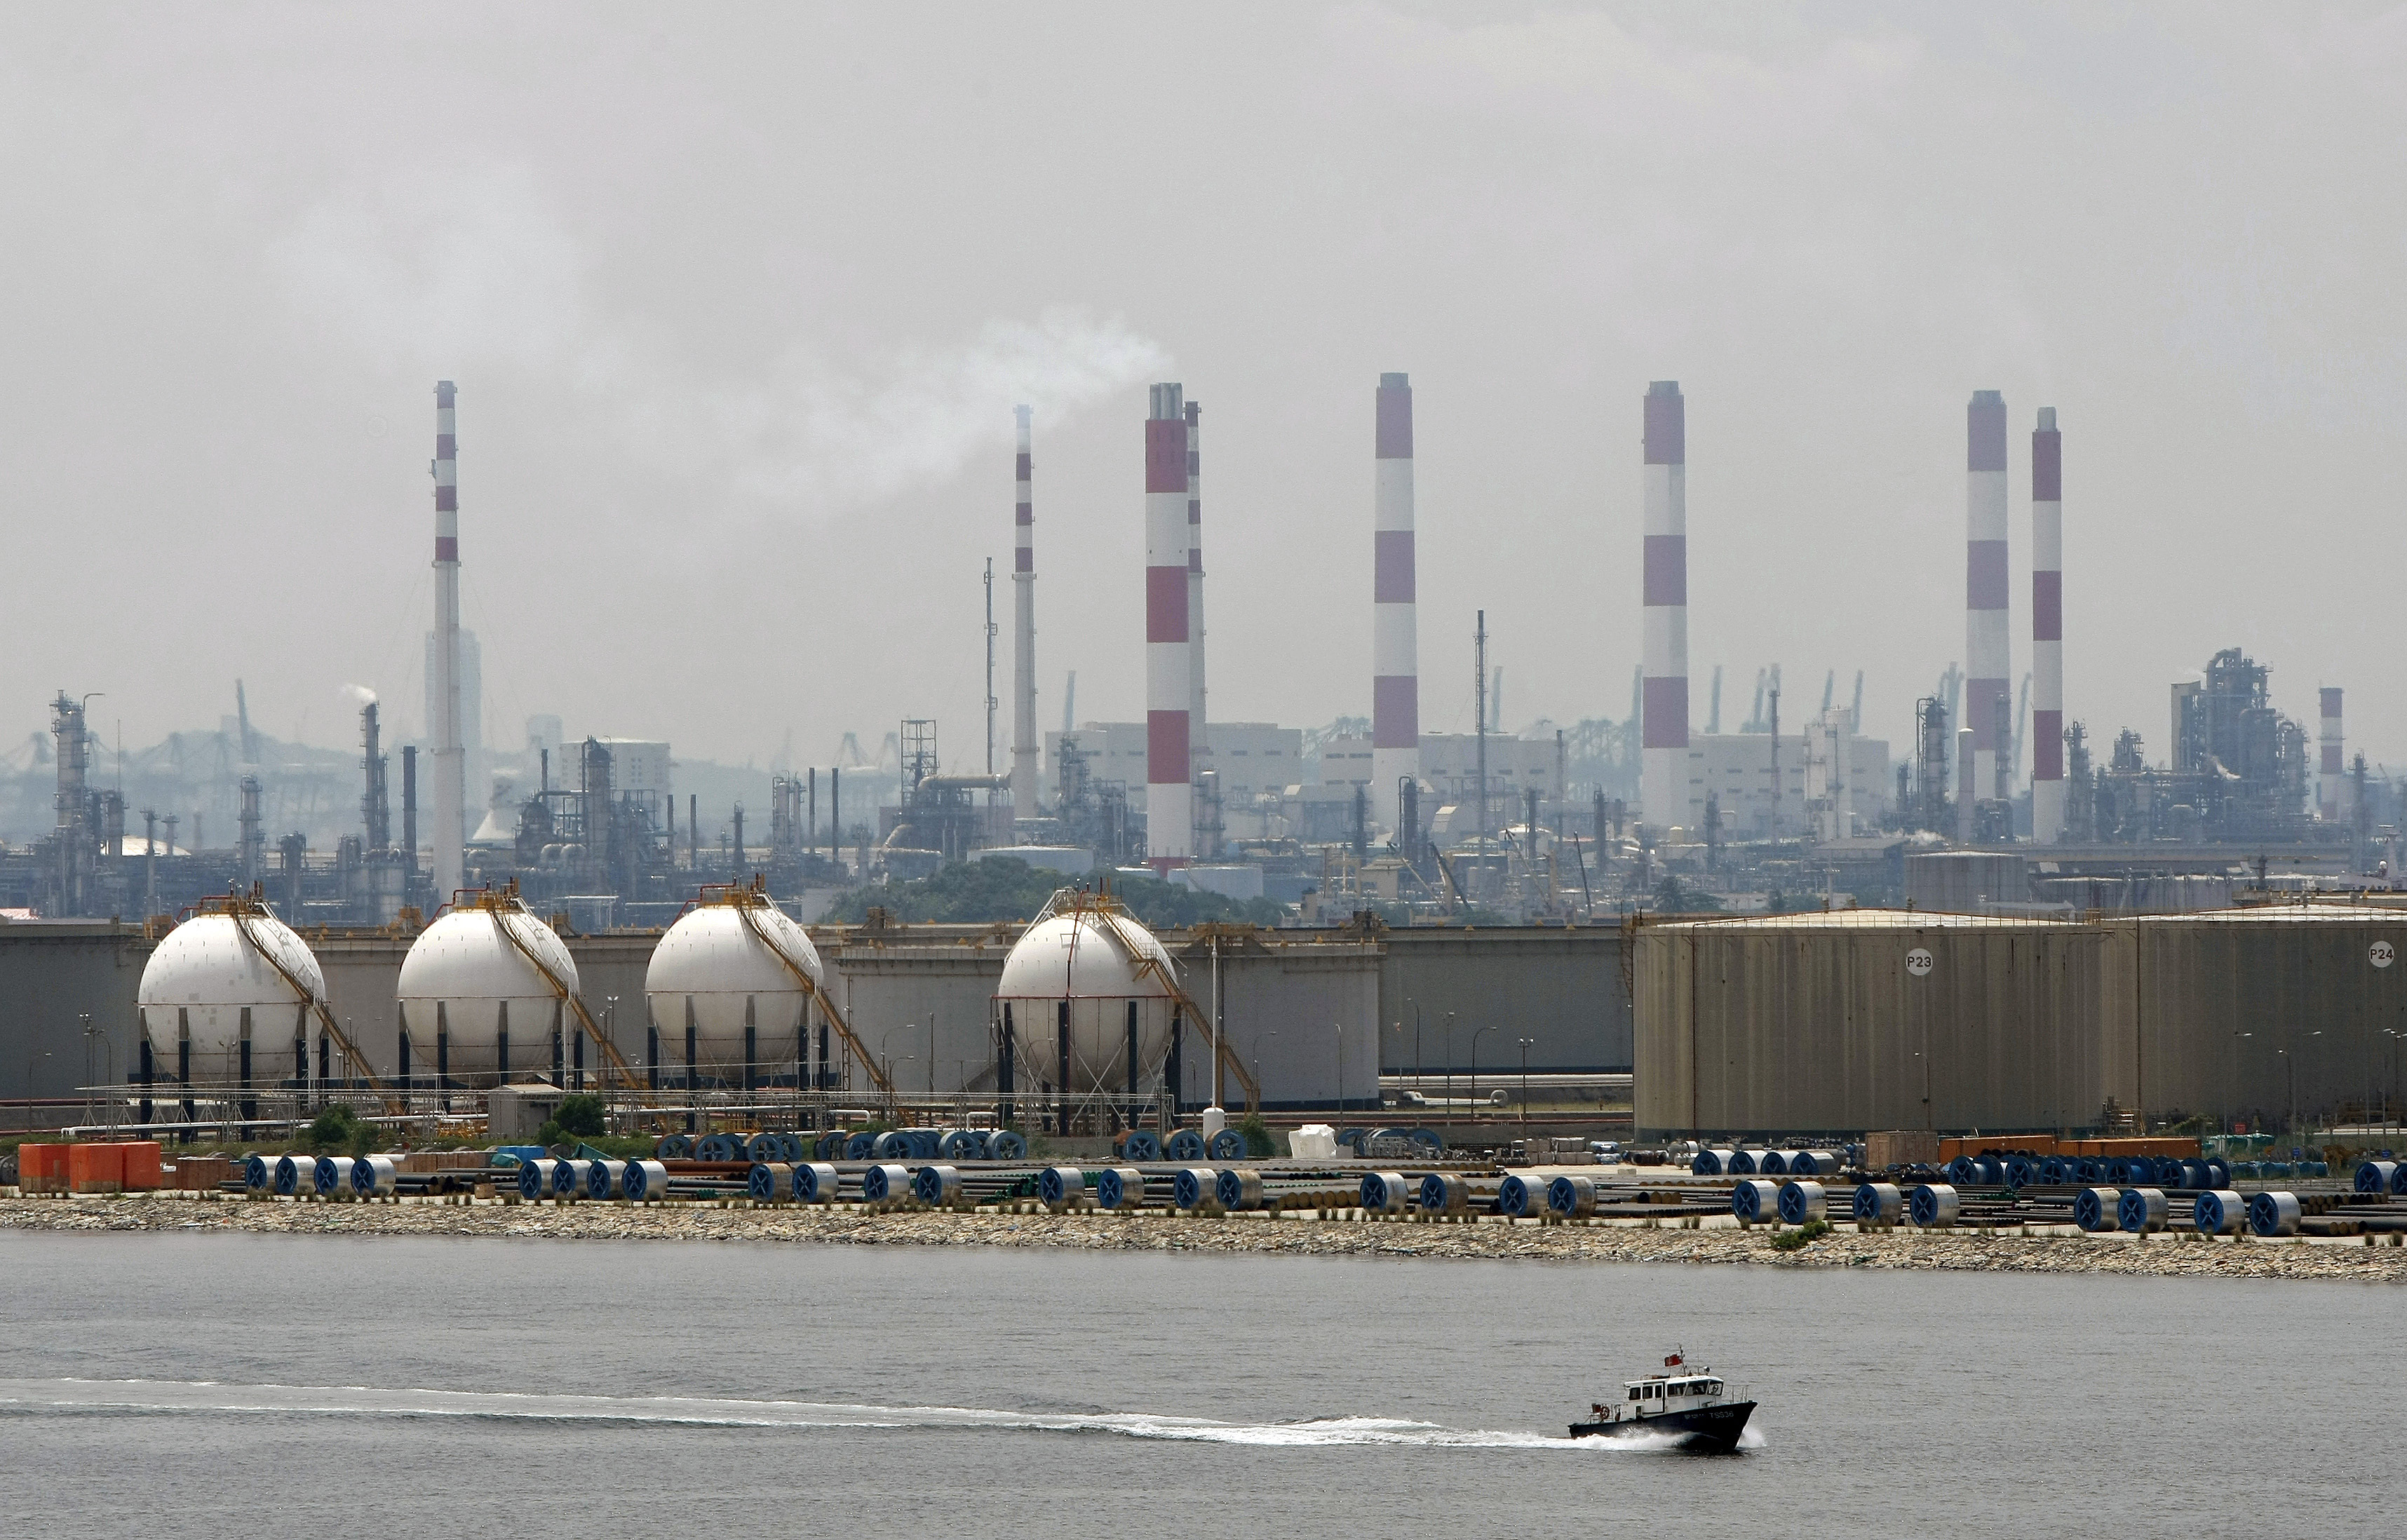 A boat passes in front of an oil refinery located on Singapore's Jurong Island